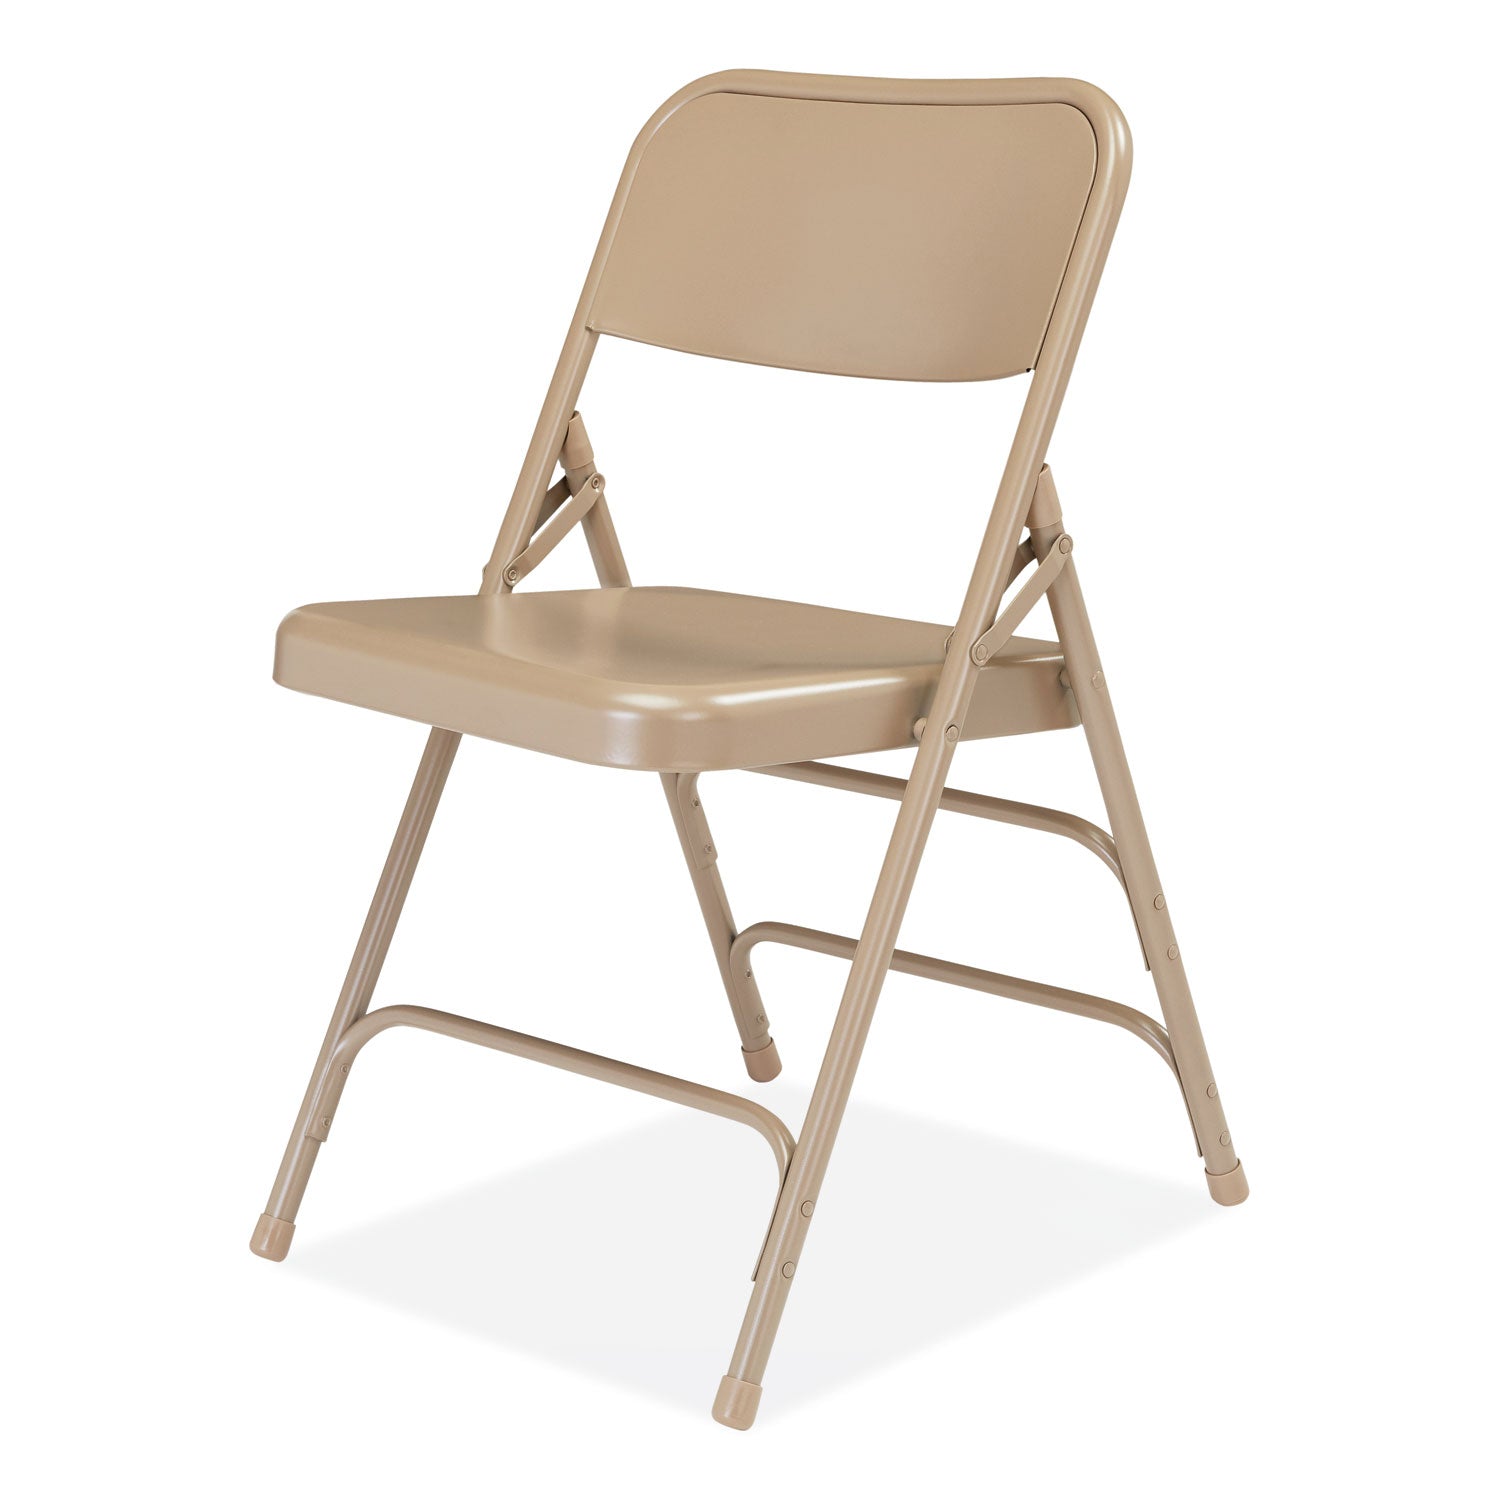 300-series-deluxe-all-steel-triple-brace-folding-chair-supports-480-lb-1725-seat-ht-beige-4-ct-ships-in-1-3-bus-days_nps301 - 3